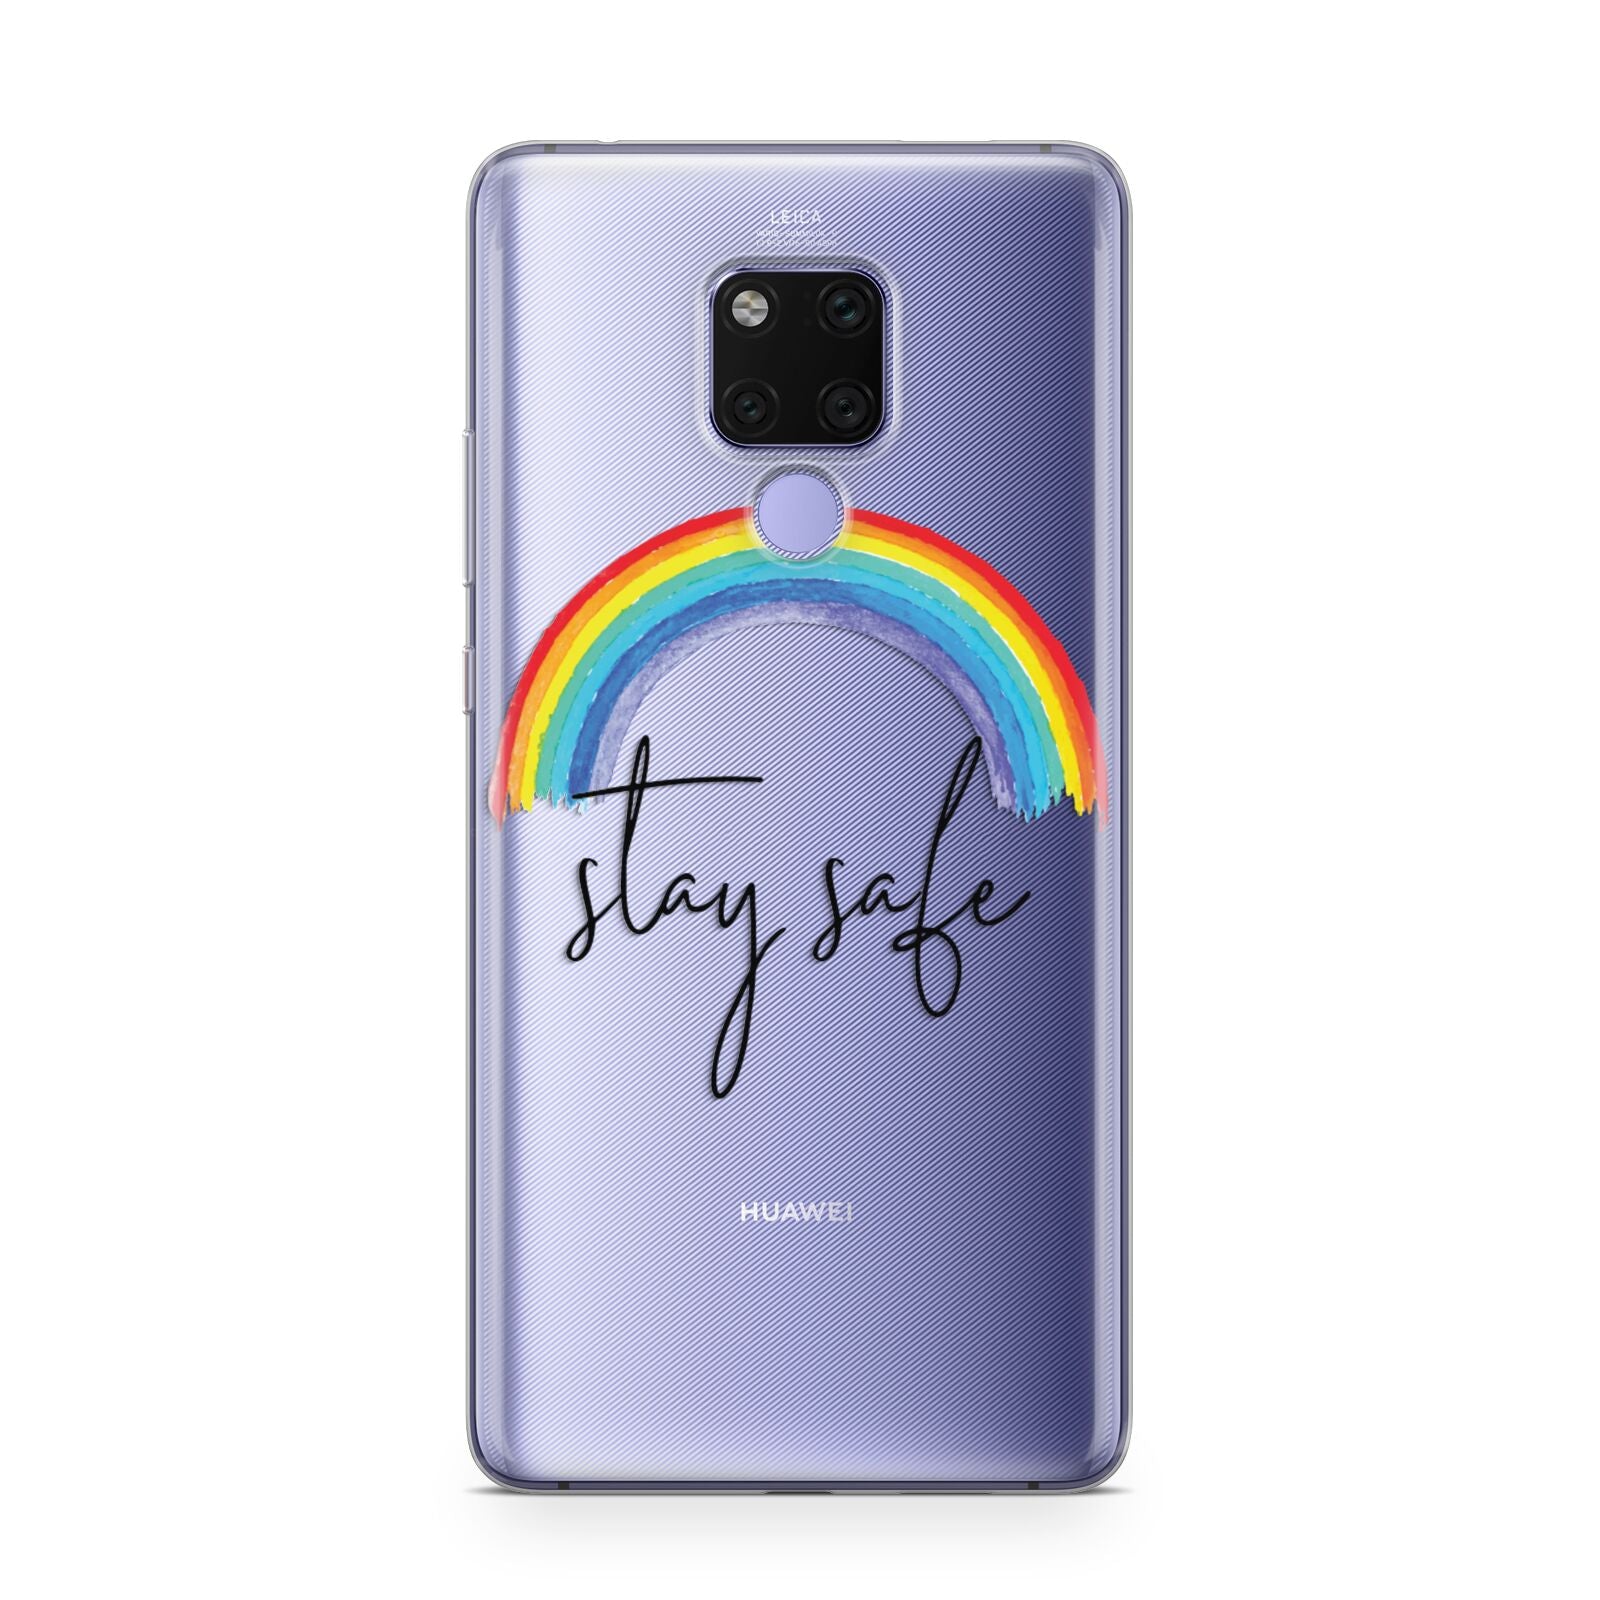 Stay Safe Rainbow Huawei Mate 20X Phone Case